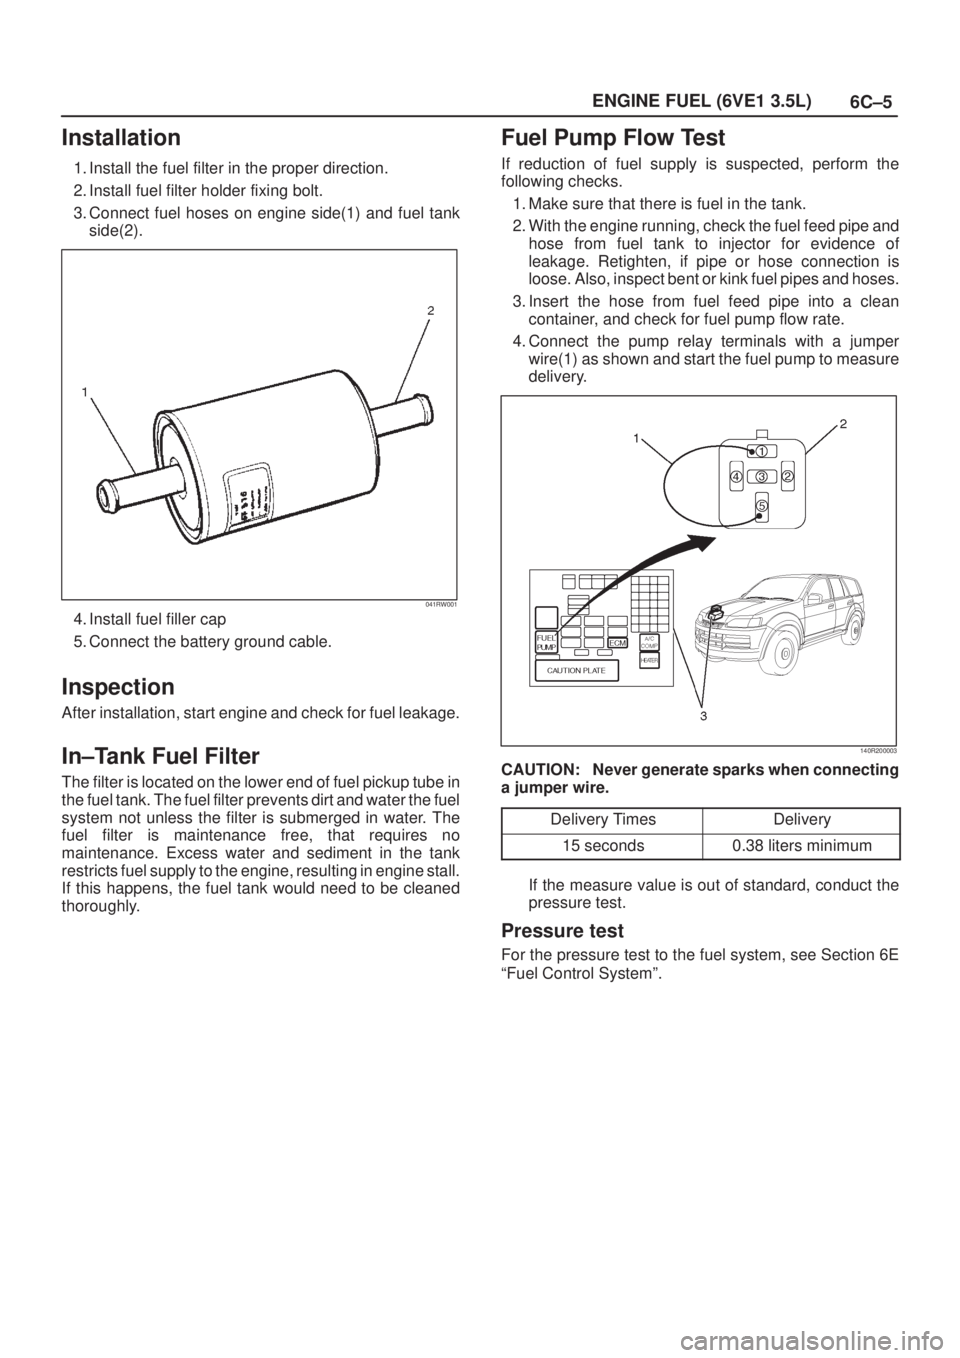 ISUZU AXIOM 2002  Service Repair Manual 6C±5 ENGINE FUEL (6VE1 3.5L)
Installation
1. Install the fuel filter in the proper direction.
2. Install fuel filter holder fixing bolt.
3. Connect fuel hoses on engine side(1) and fuel tank
side(2).